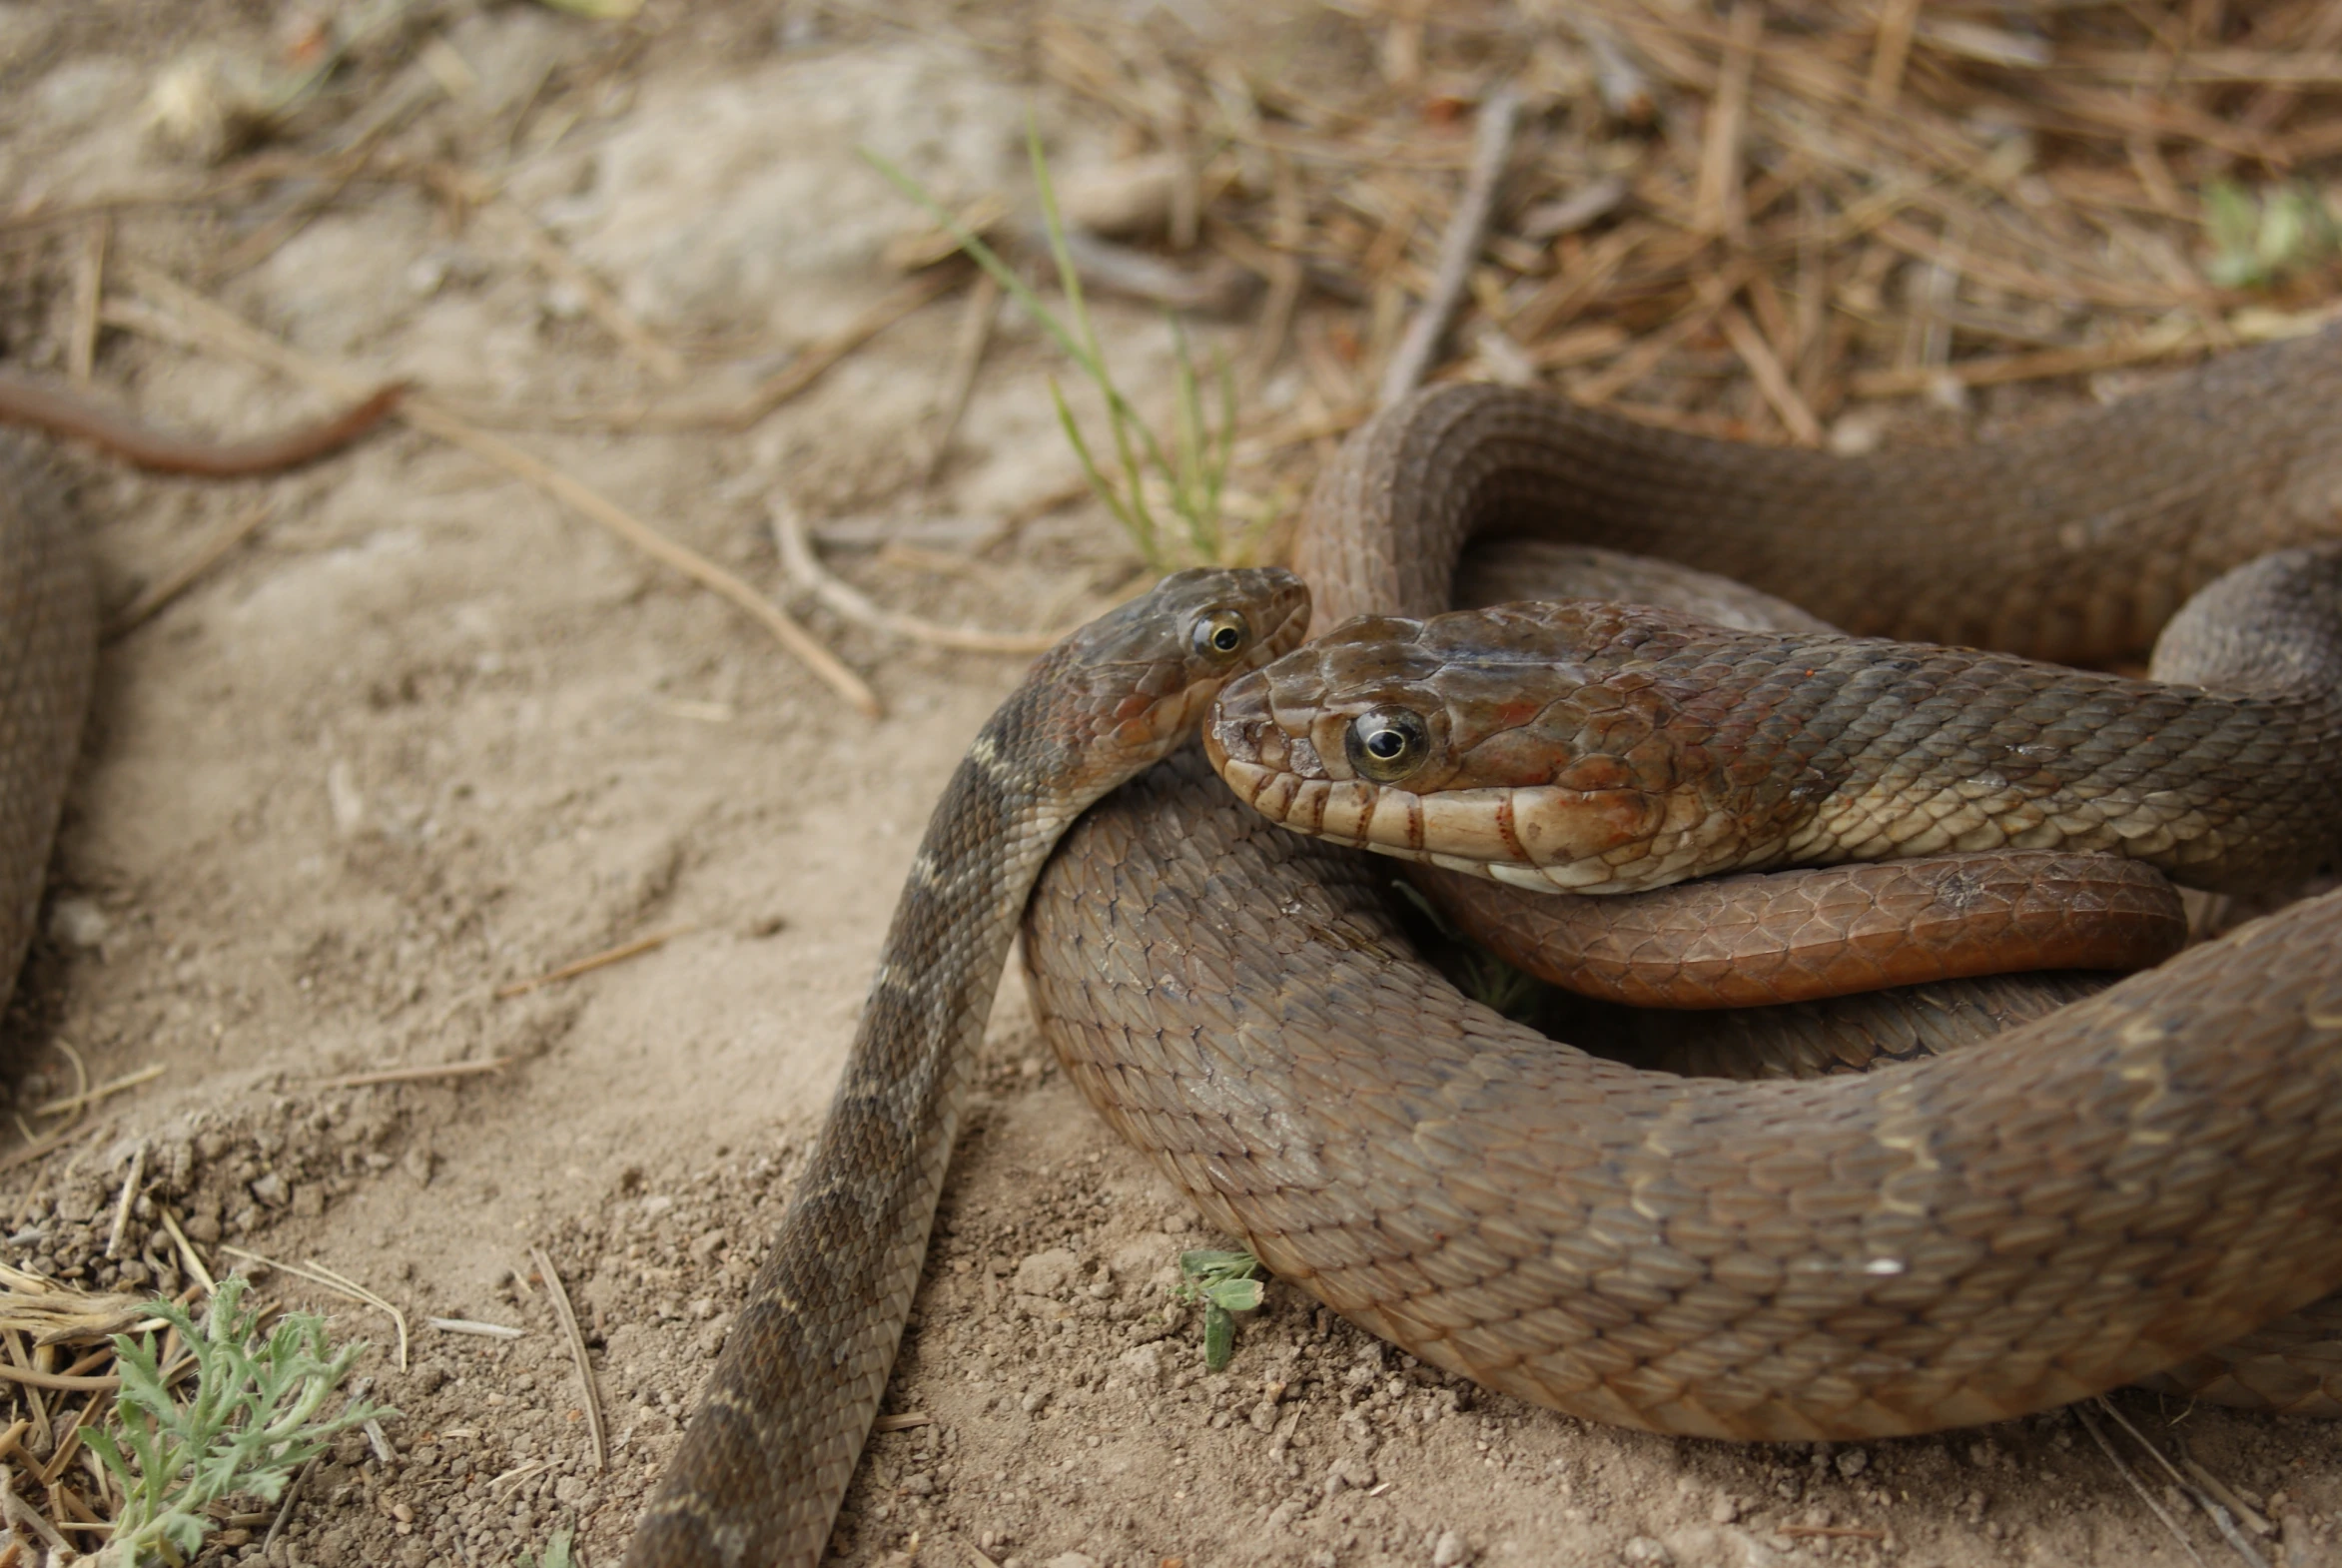 two large brown snakes are on the ground